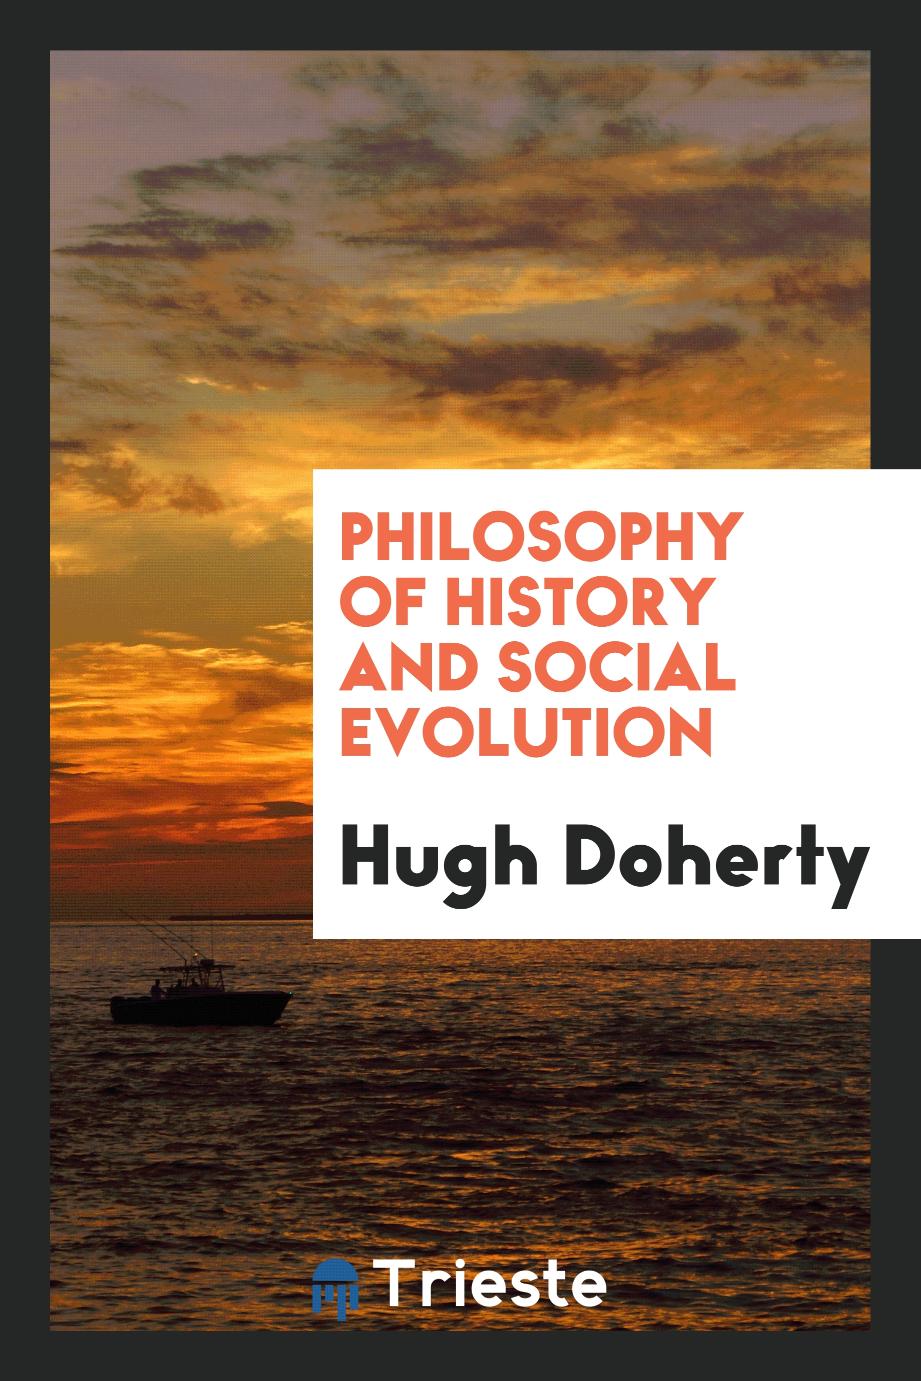 Philosophy of History and Social Evolution